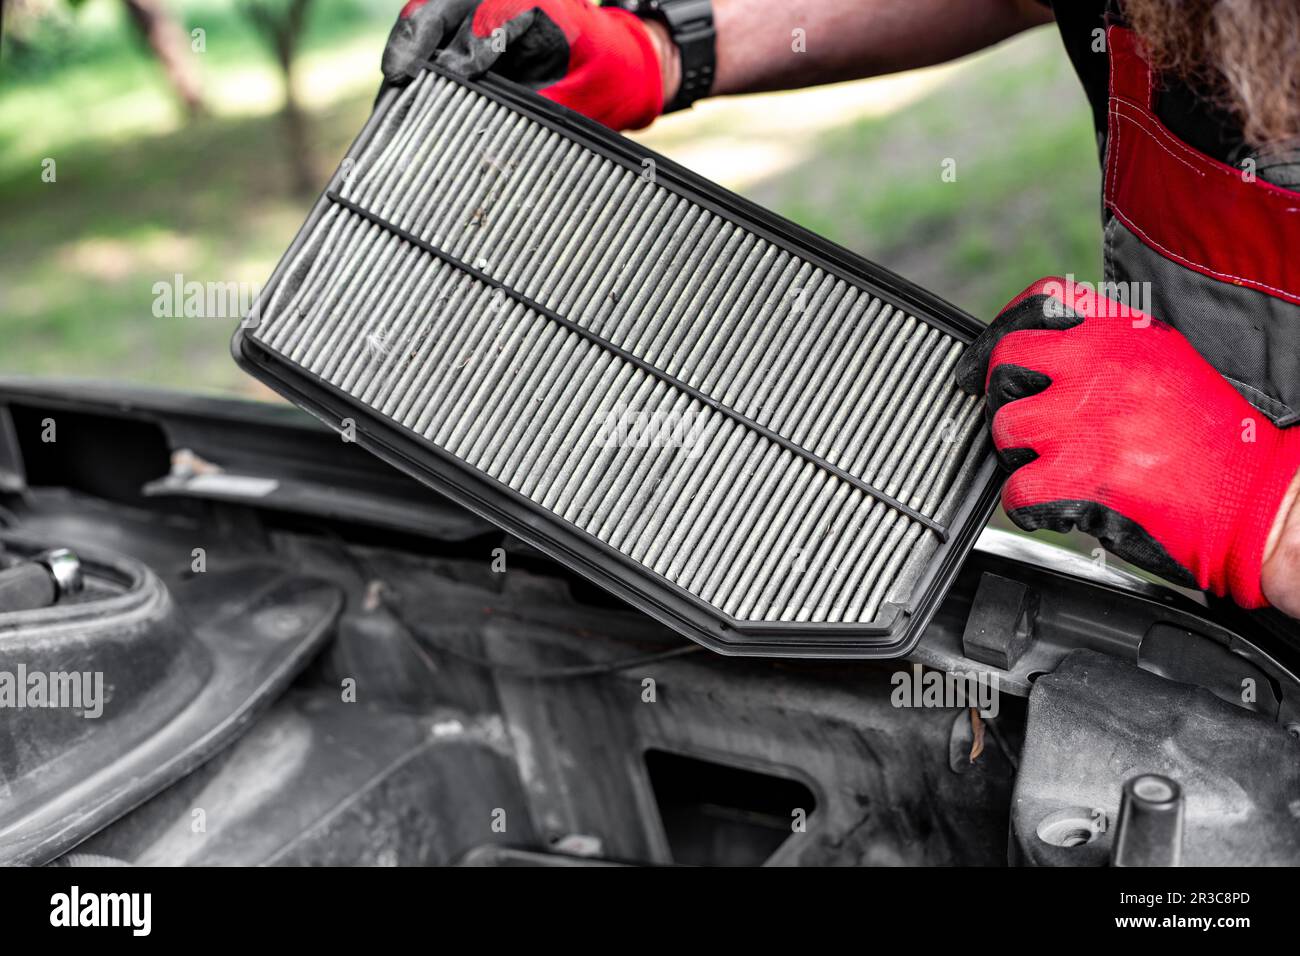 air filter of an internal combustion engine in the hands of a mechanic. Filter replacement and car repair. Stock Photo